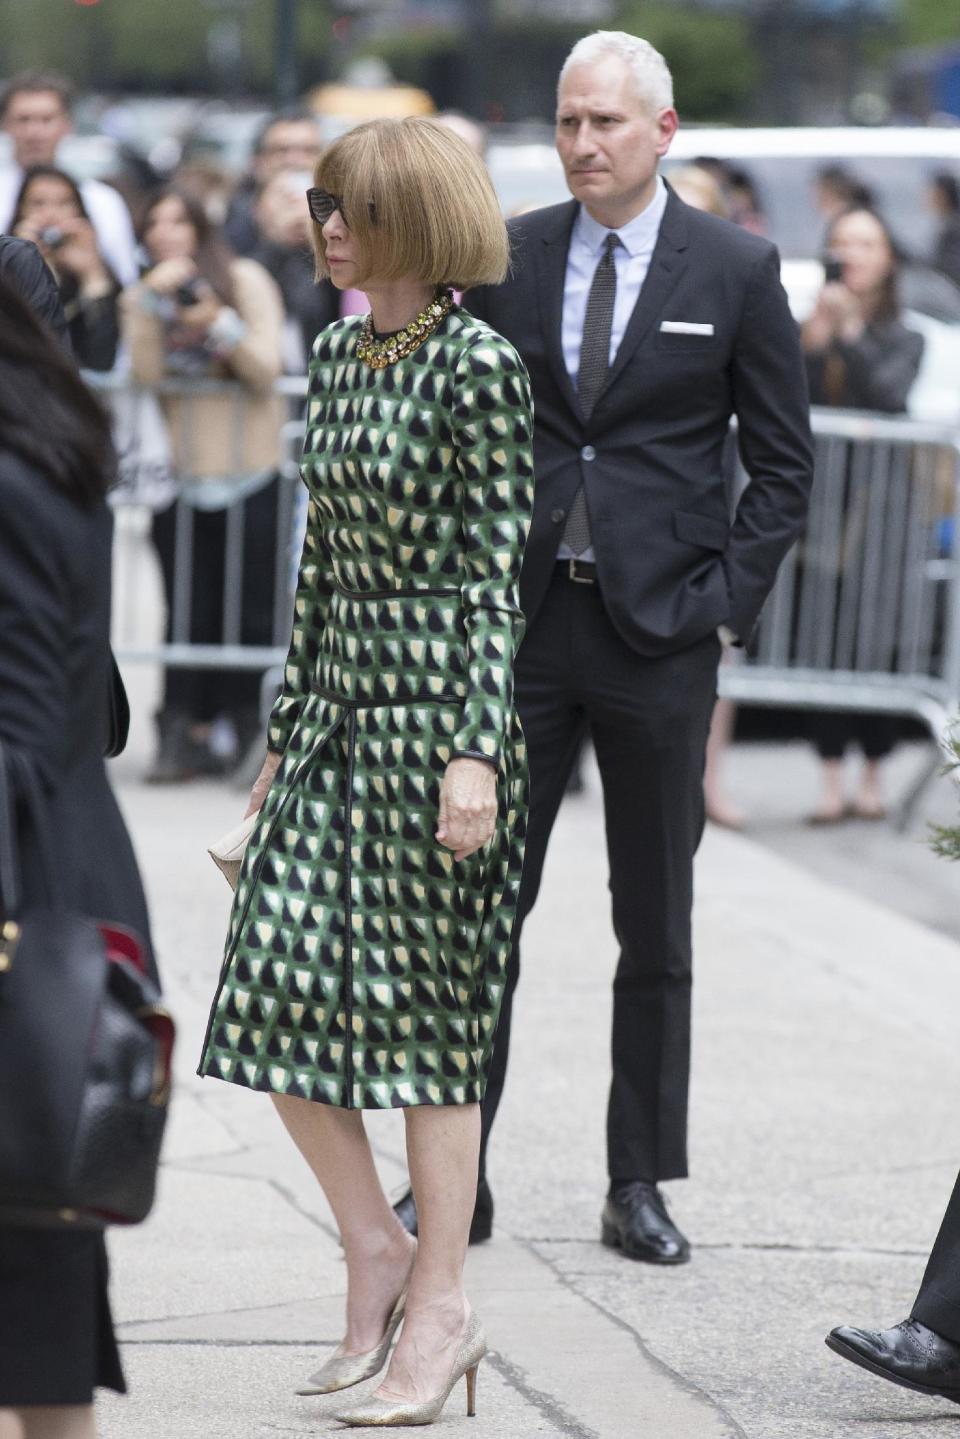 Anna Wintour, editor-in-chief of Vogue magazine, arrives at St. Bartholomew's Church for a memorial service for fashion designer L'Wren Scott, Friday, May 2, 2014, in New York. Scott committed suicide on March 17 in her Manhattan apartment. (AP Photo/John Minchillo)